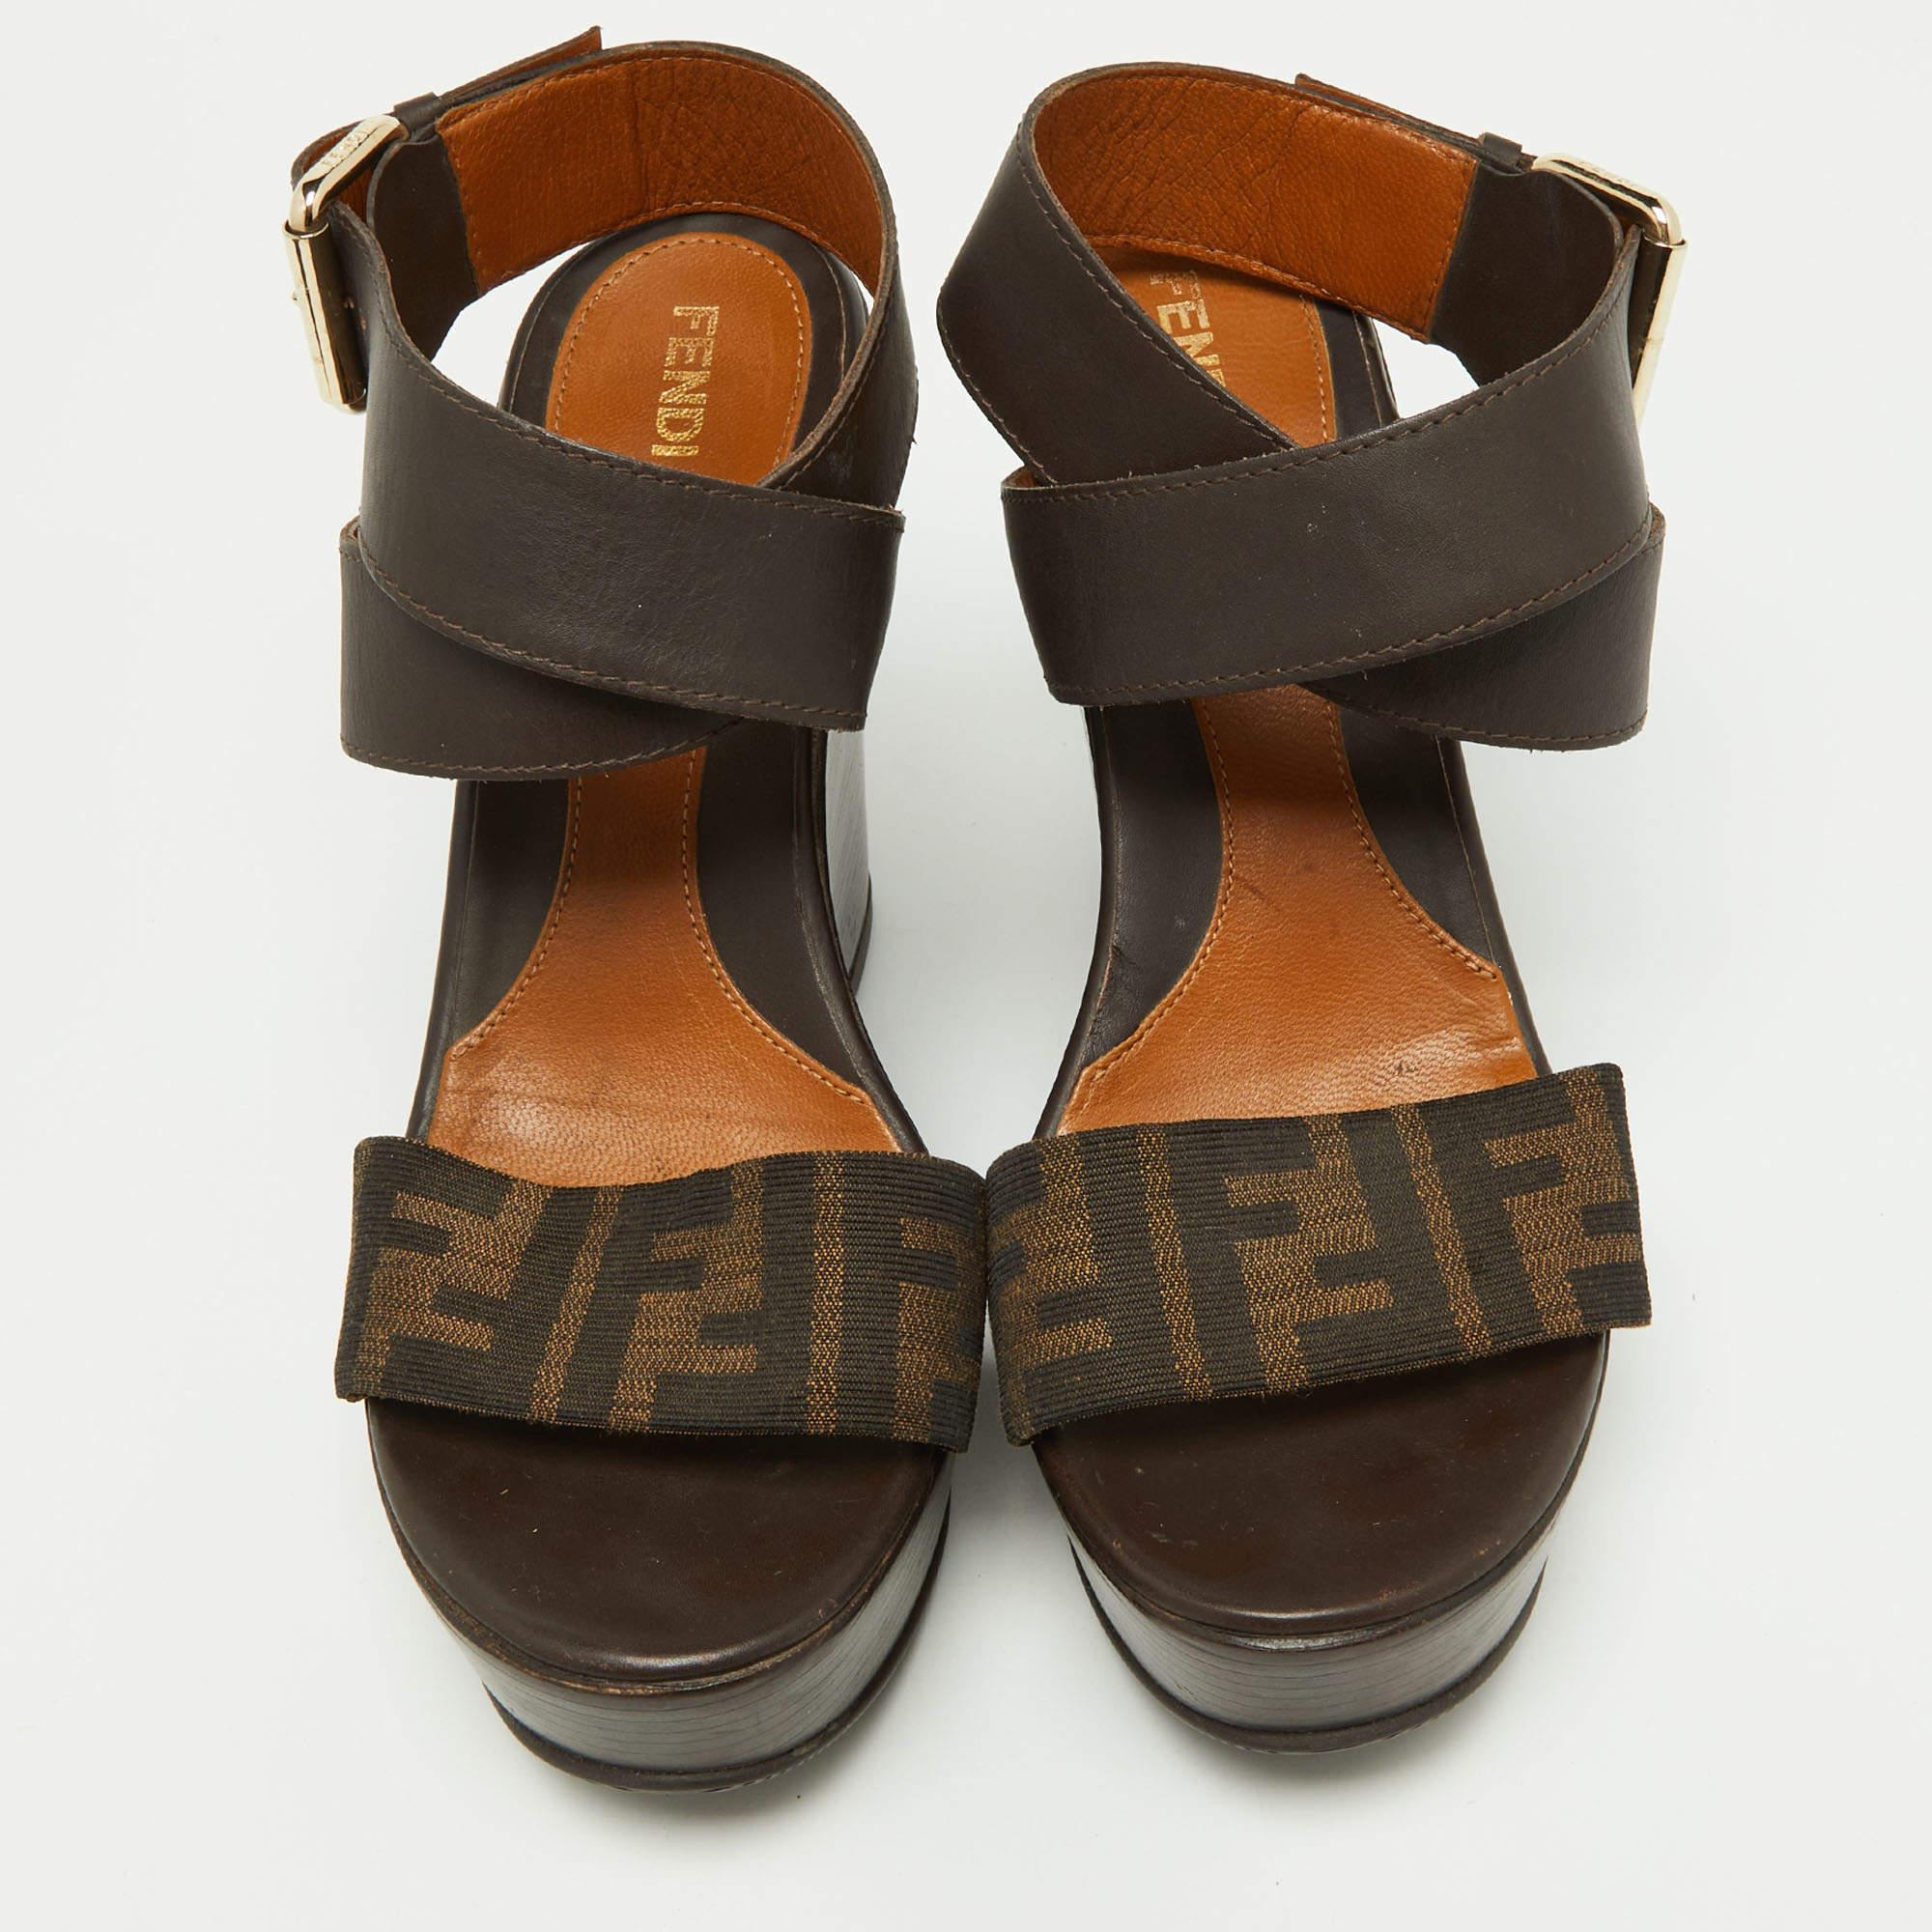 Wonderfully crafted shoes added with notable elements to fit well and pair perfectly with all your plans. Make these Fendi sandals yours today!

